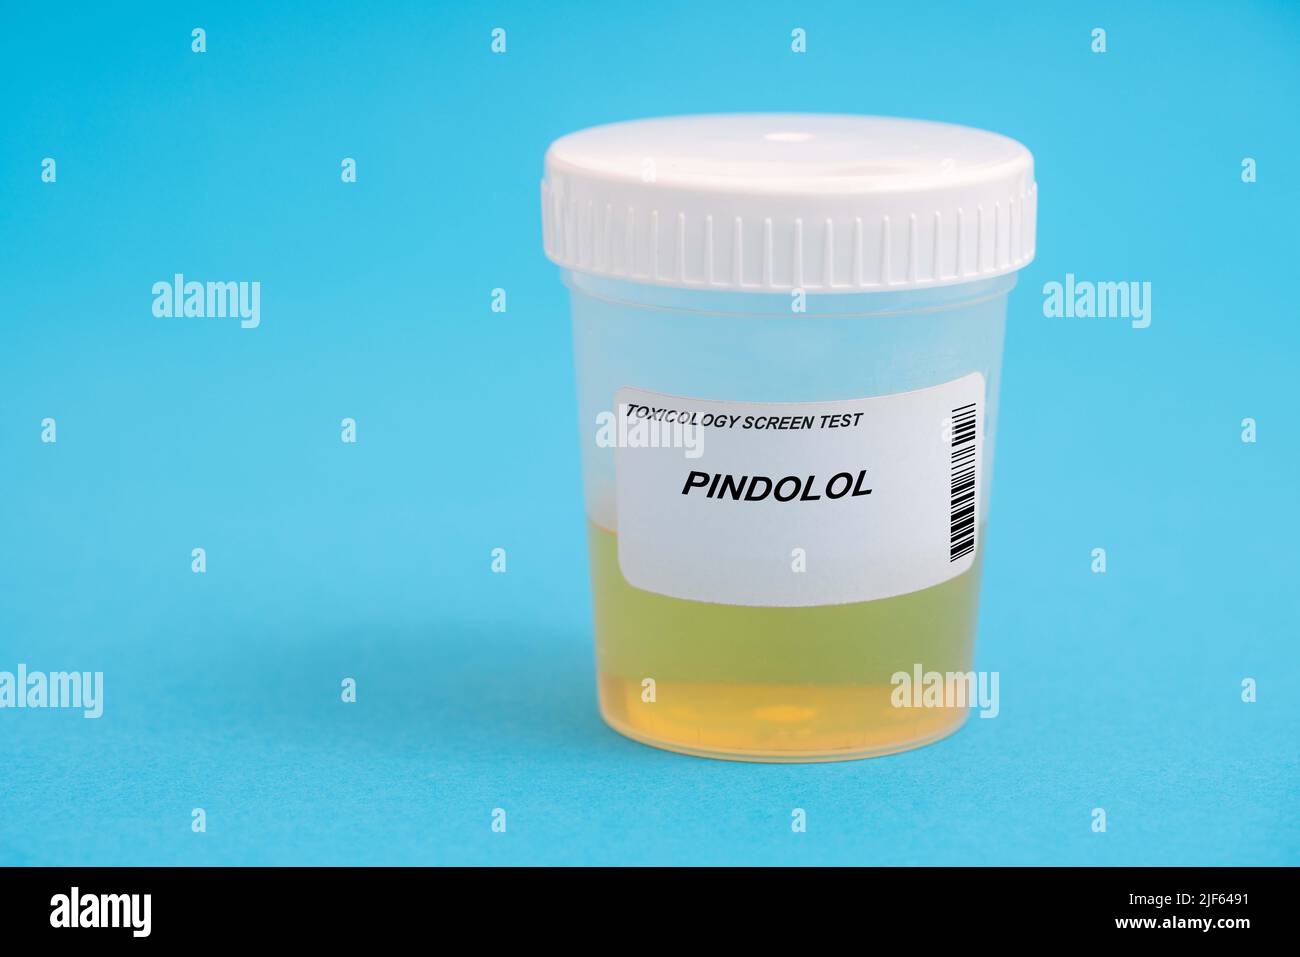 Pindolol. Pindolol toxicology screen urine tests for doping and drugs Stock Photo